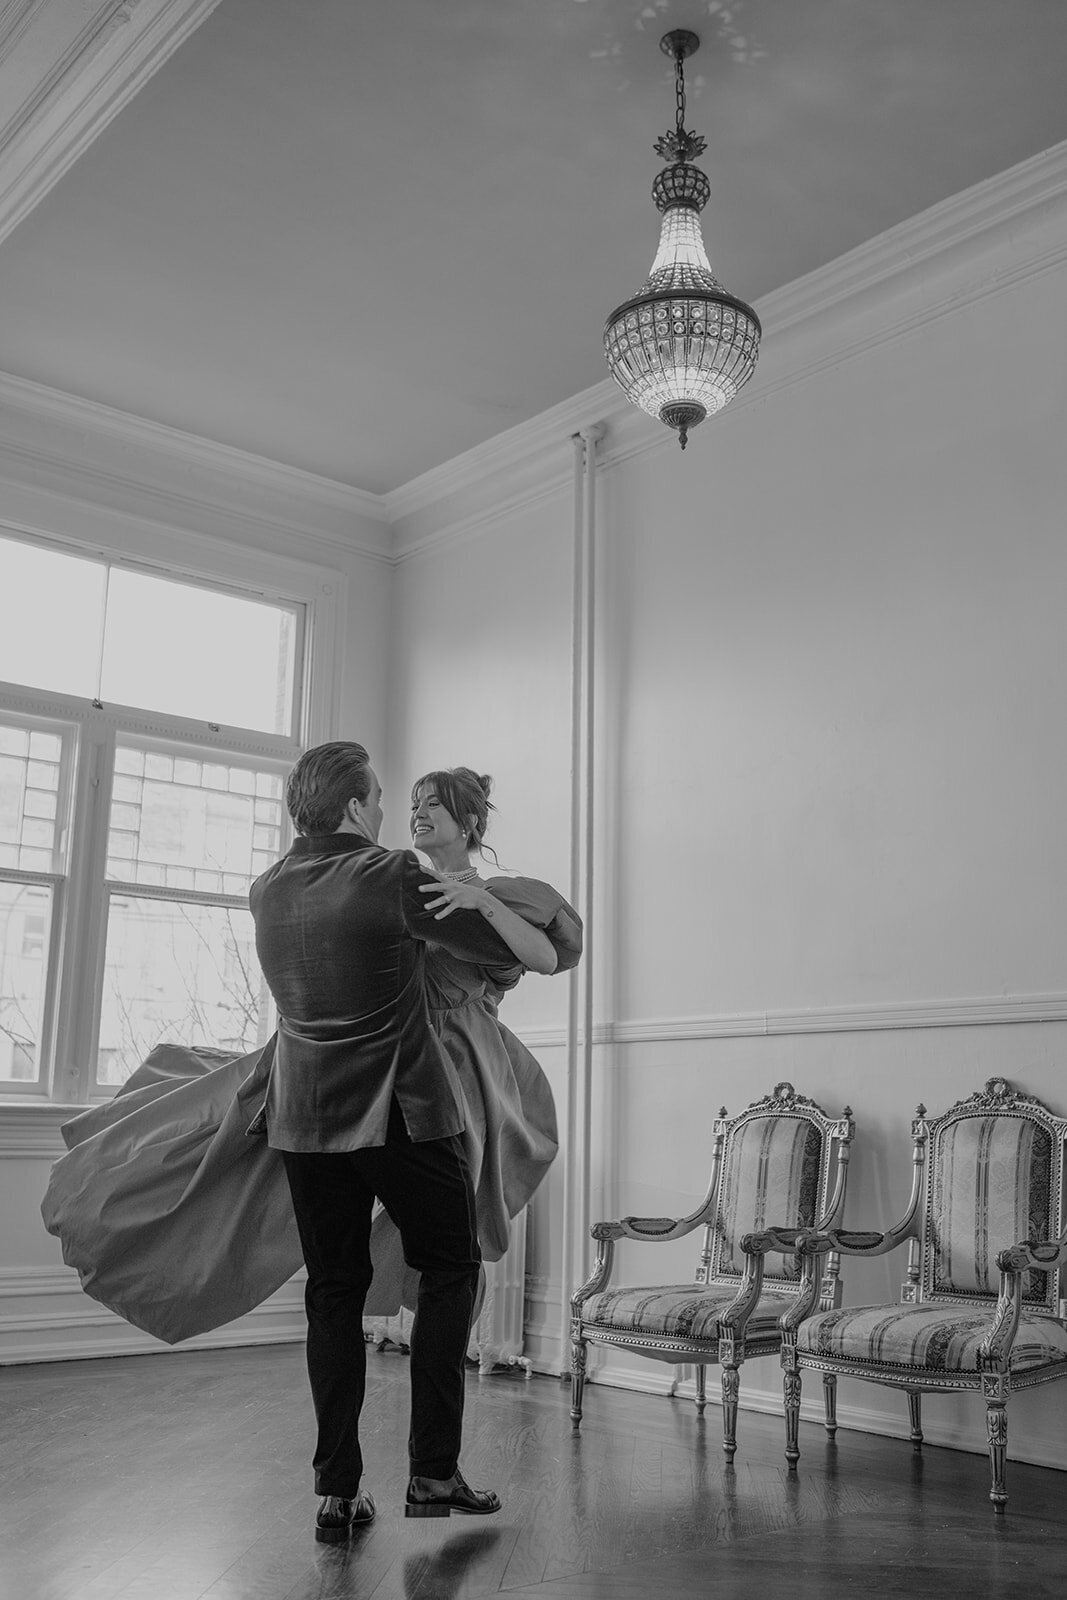 downtown-toronto-the-great-hall-wedding-city-vibes-nontraditional-modern-romantic-1630